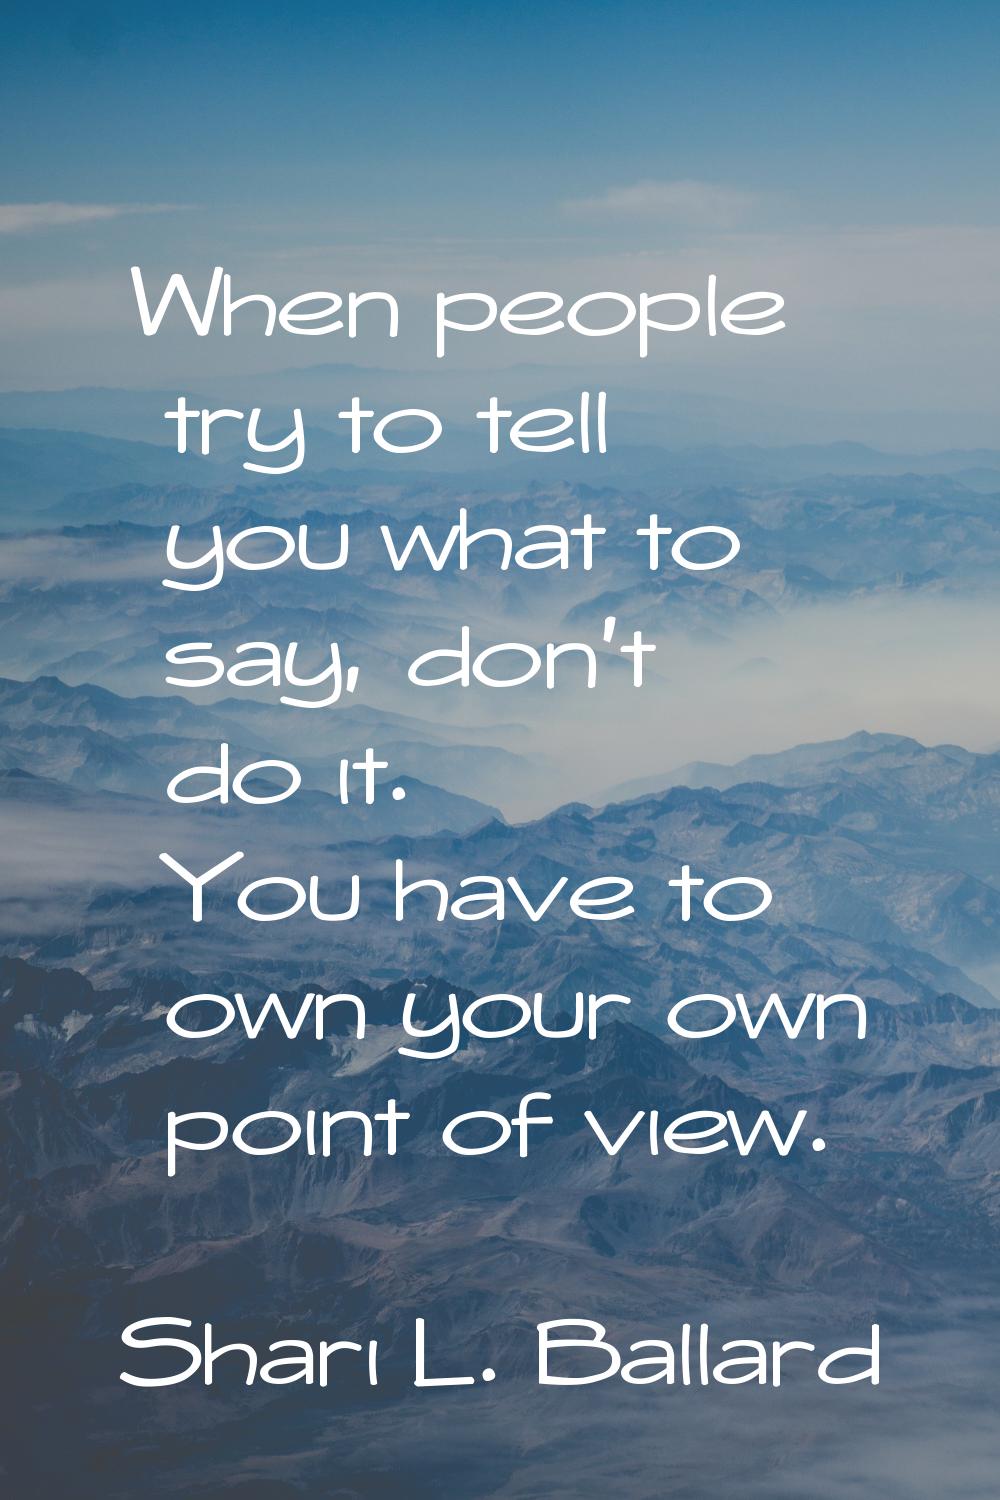 When people try to tell you what to say, don't do it. You have to own your own point of view.